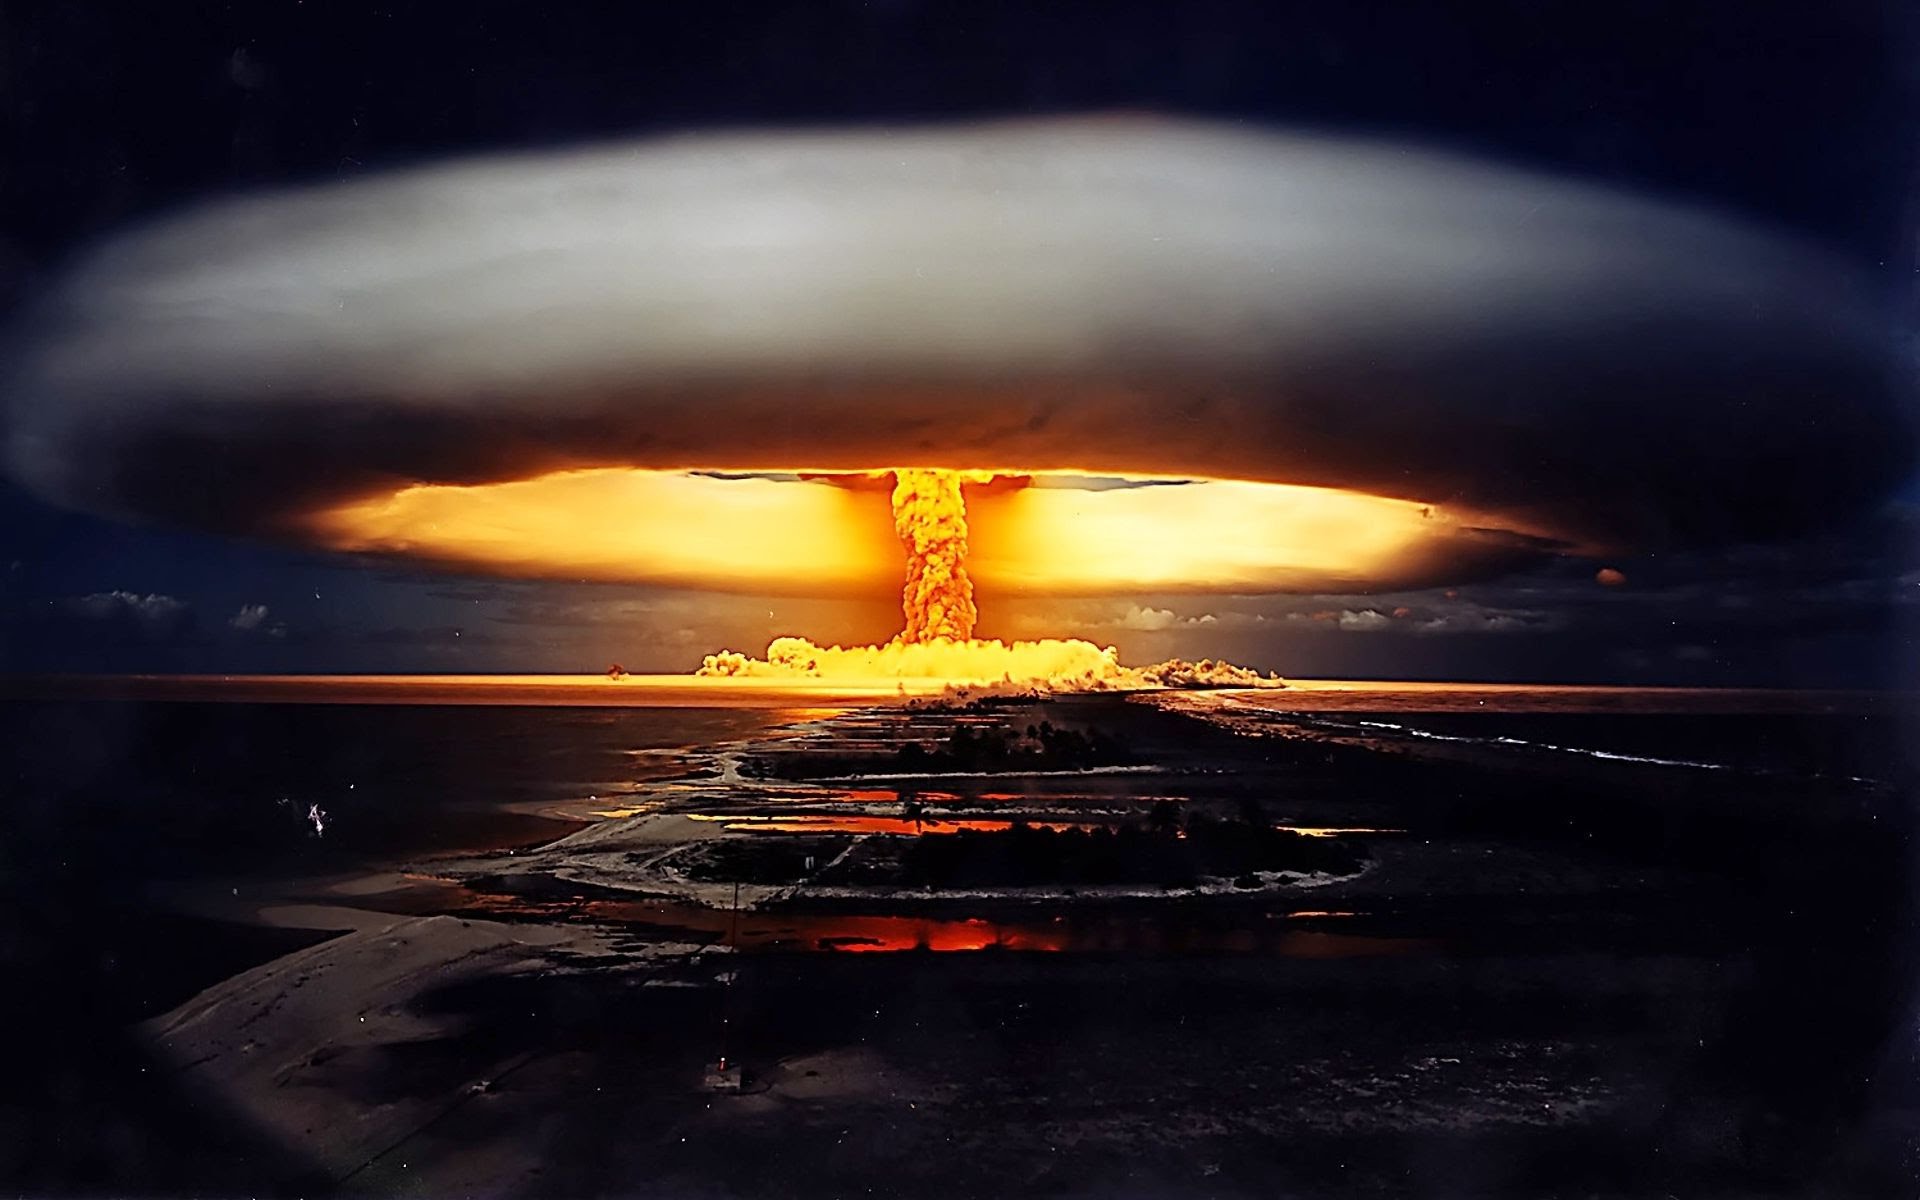 5 Times We Barely Avoided Nuclear World War 3 During the Cold War